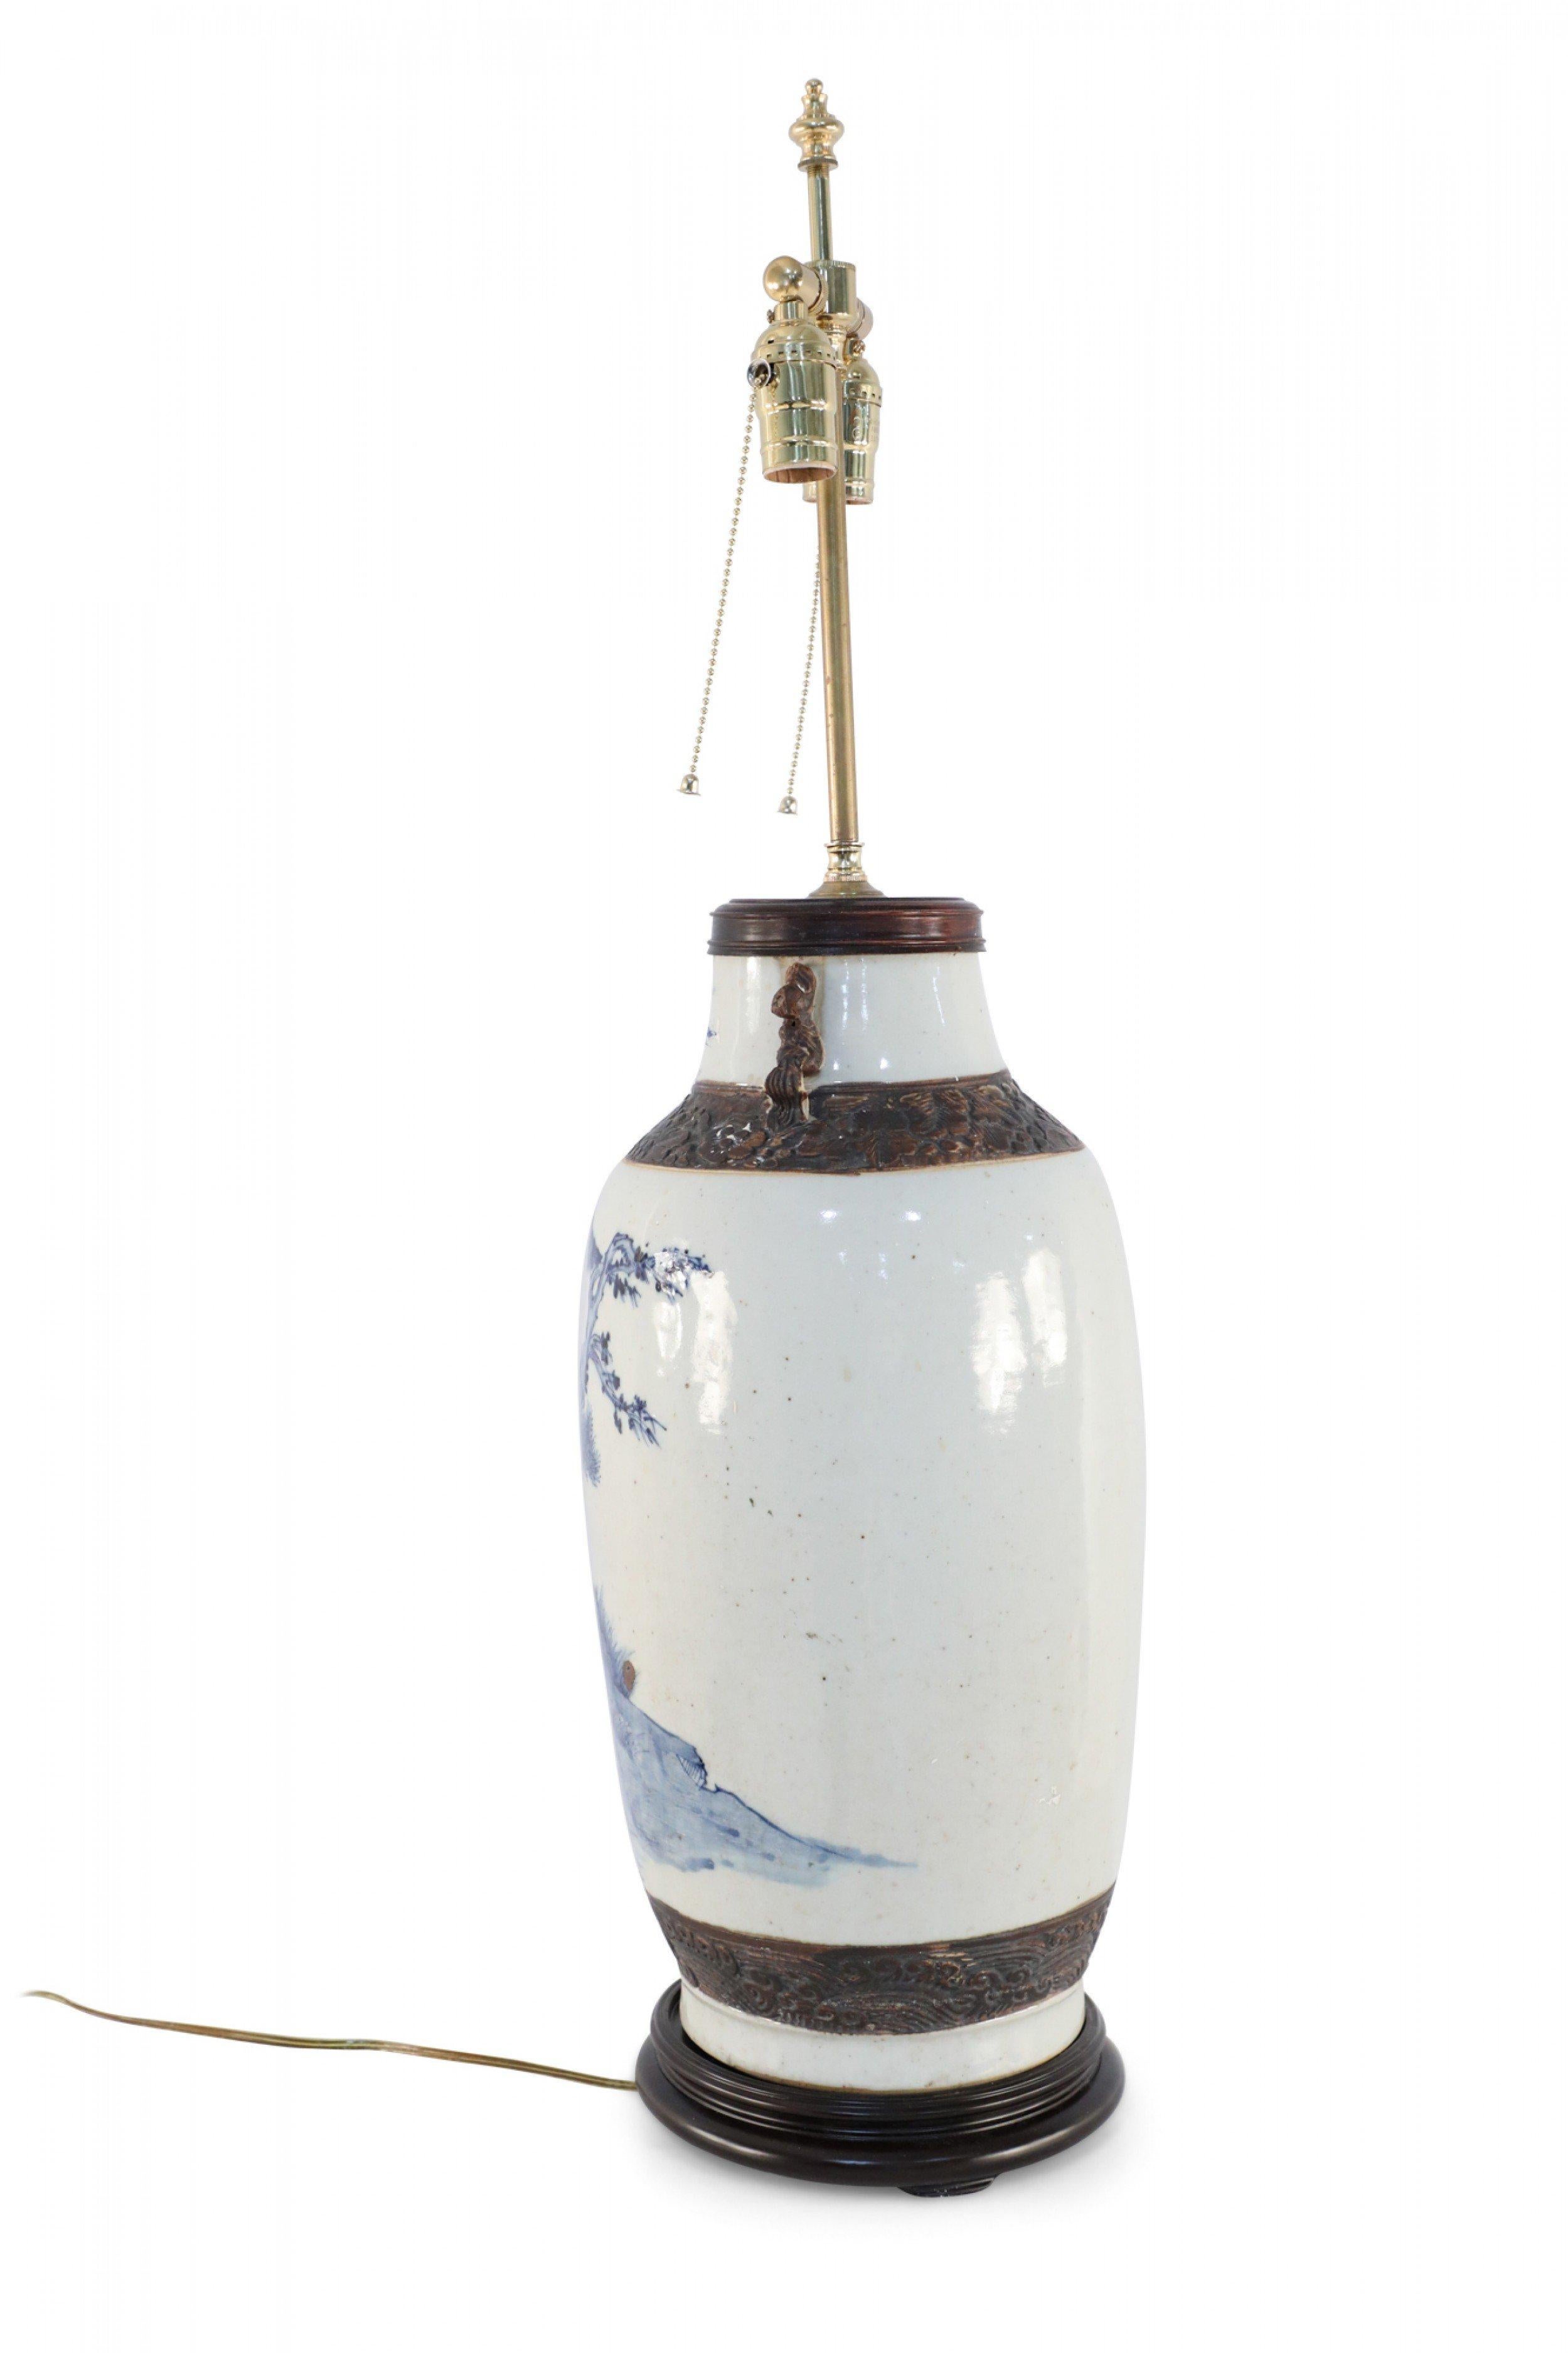 Antique Chinese (Late 19th Century) table lamp made from an off-white and blue stoneware vase with carved floral bands, two small decorative handles, and a scene depicting two women with umbrellas strolling in a pastoral setting on a wooden base.
 